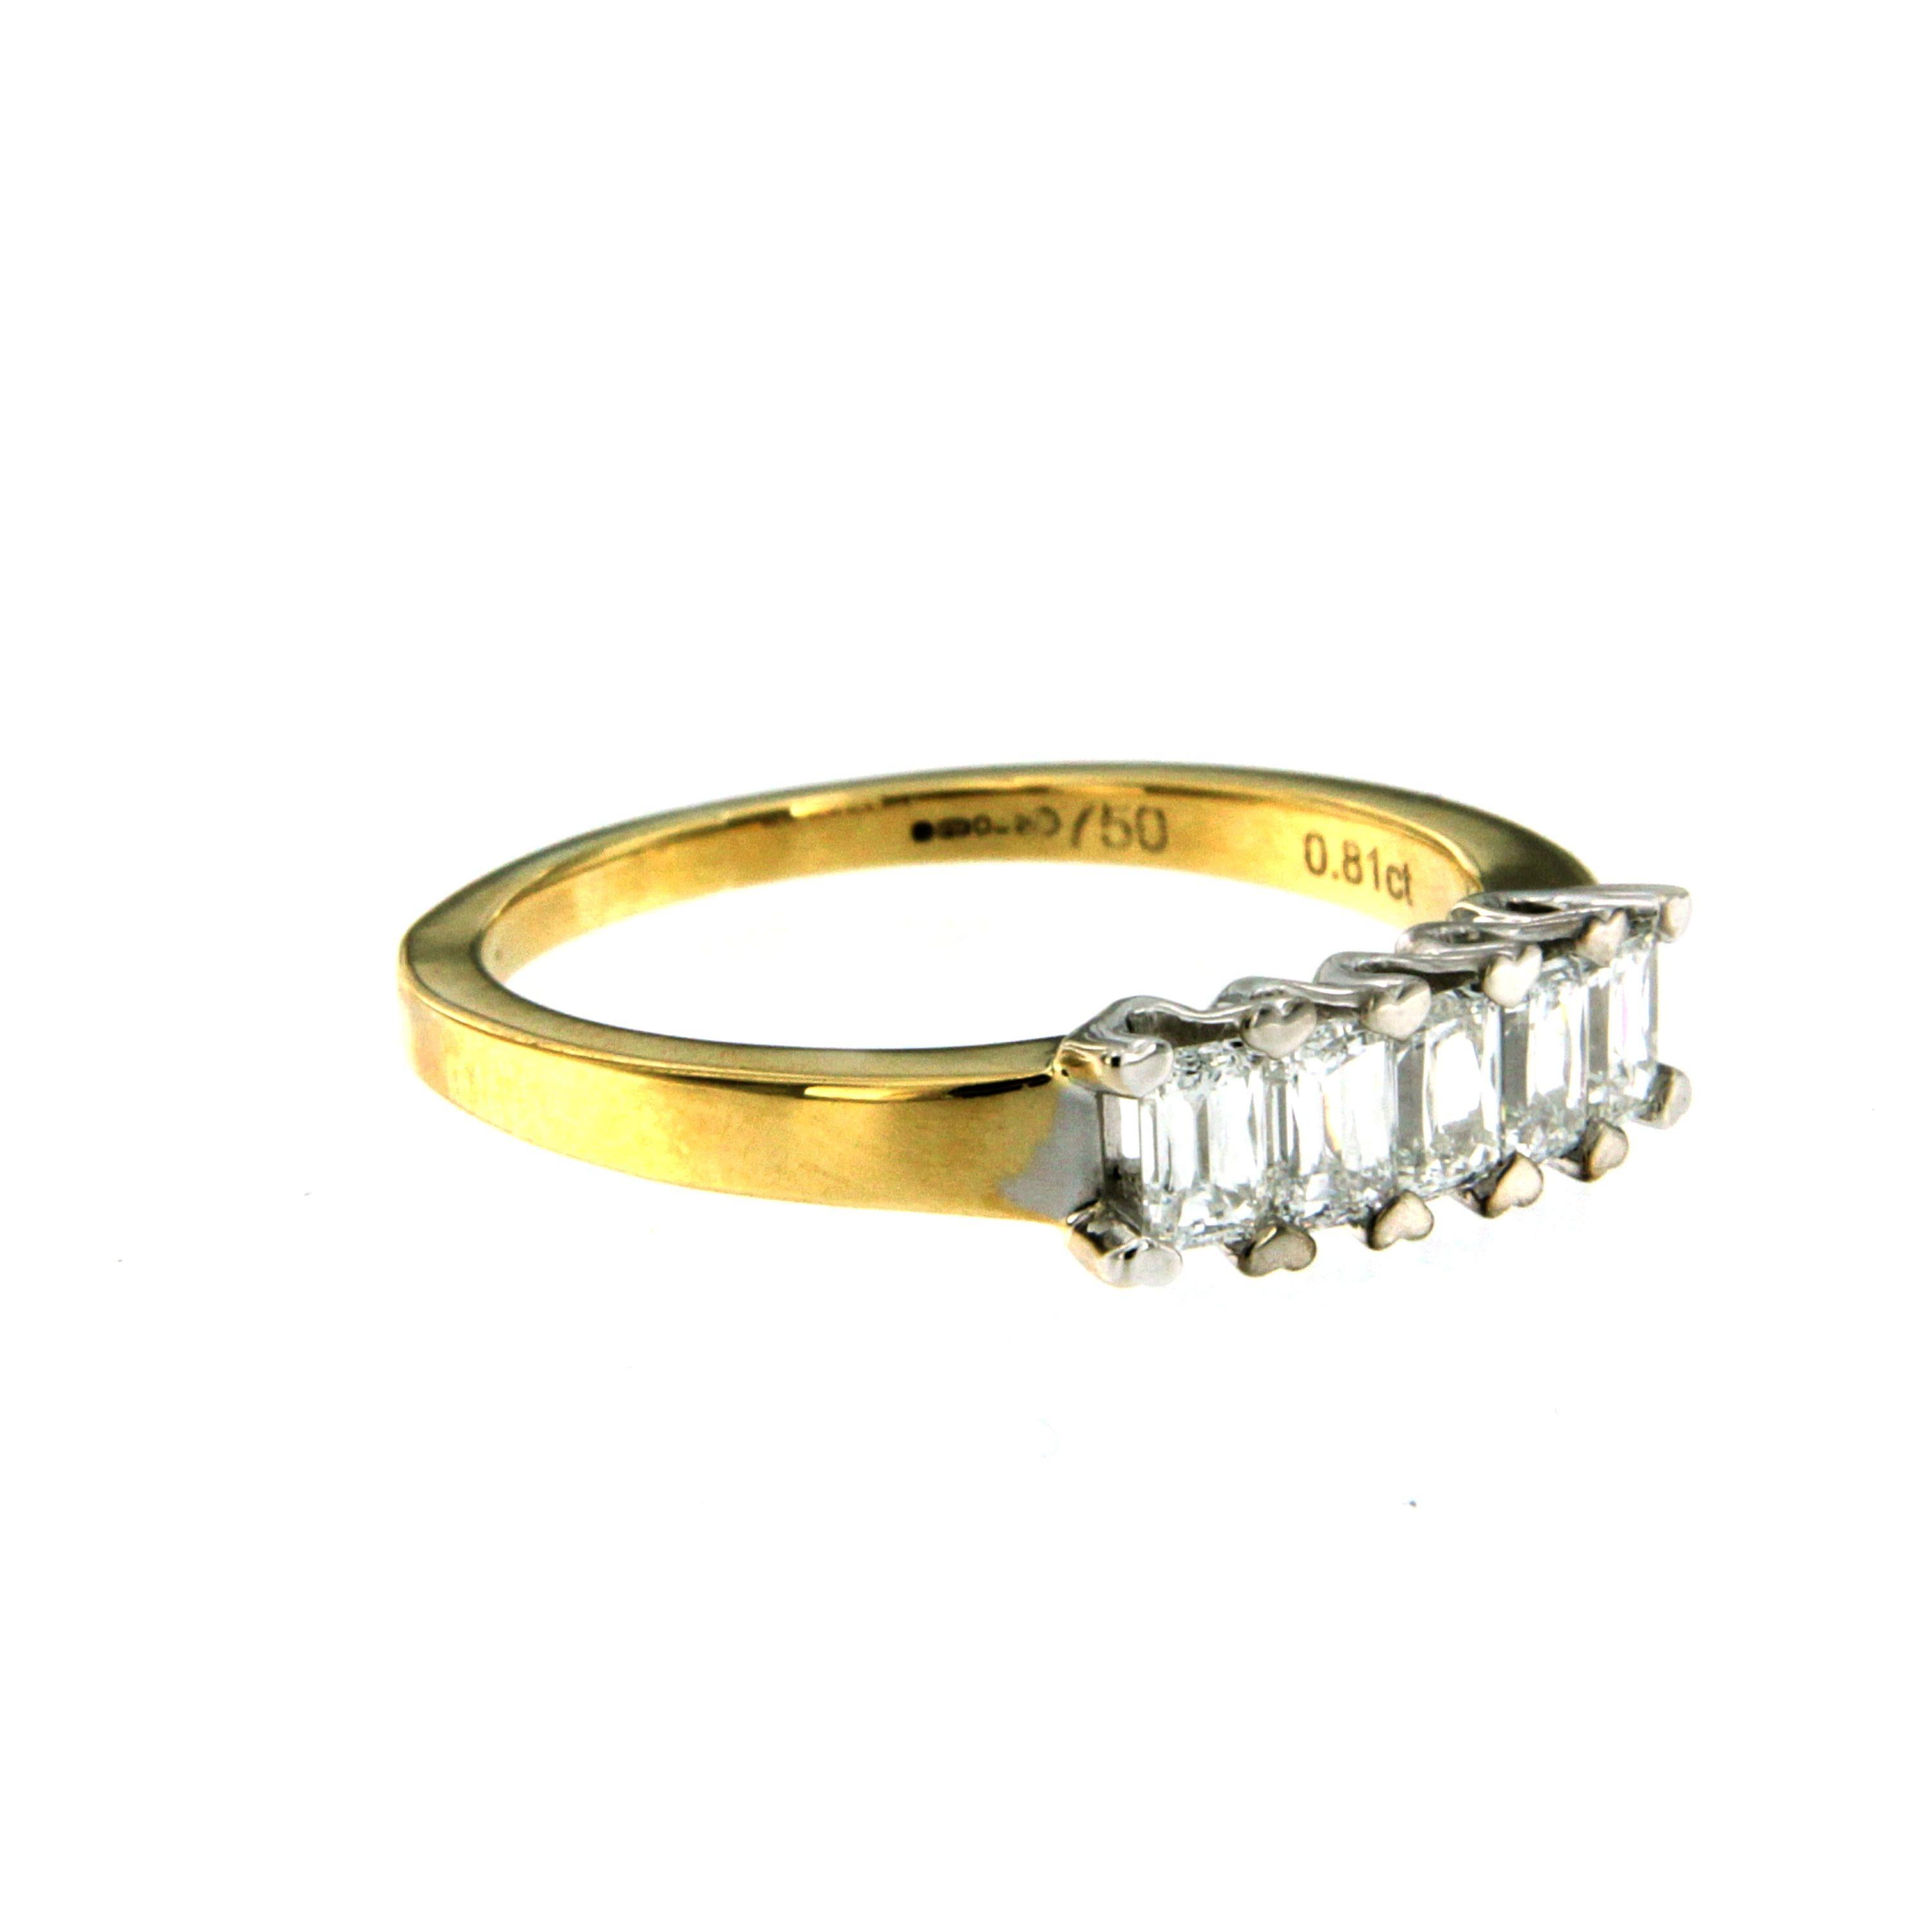 This diamond band ring is set with five shiny and sparkly baguette cut diamonds totalling 0.81 ct. estimated to be G in color and VS1 in clarity.
The band is 18k yellow gold, and the diamonds are set in 18k white gold. Circa 1980

CONDITION: